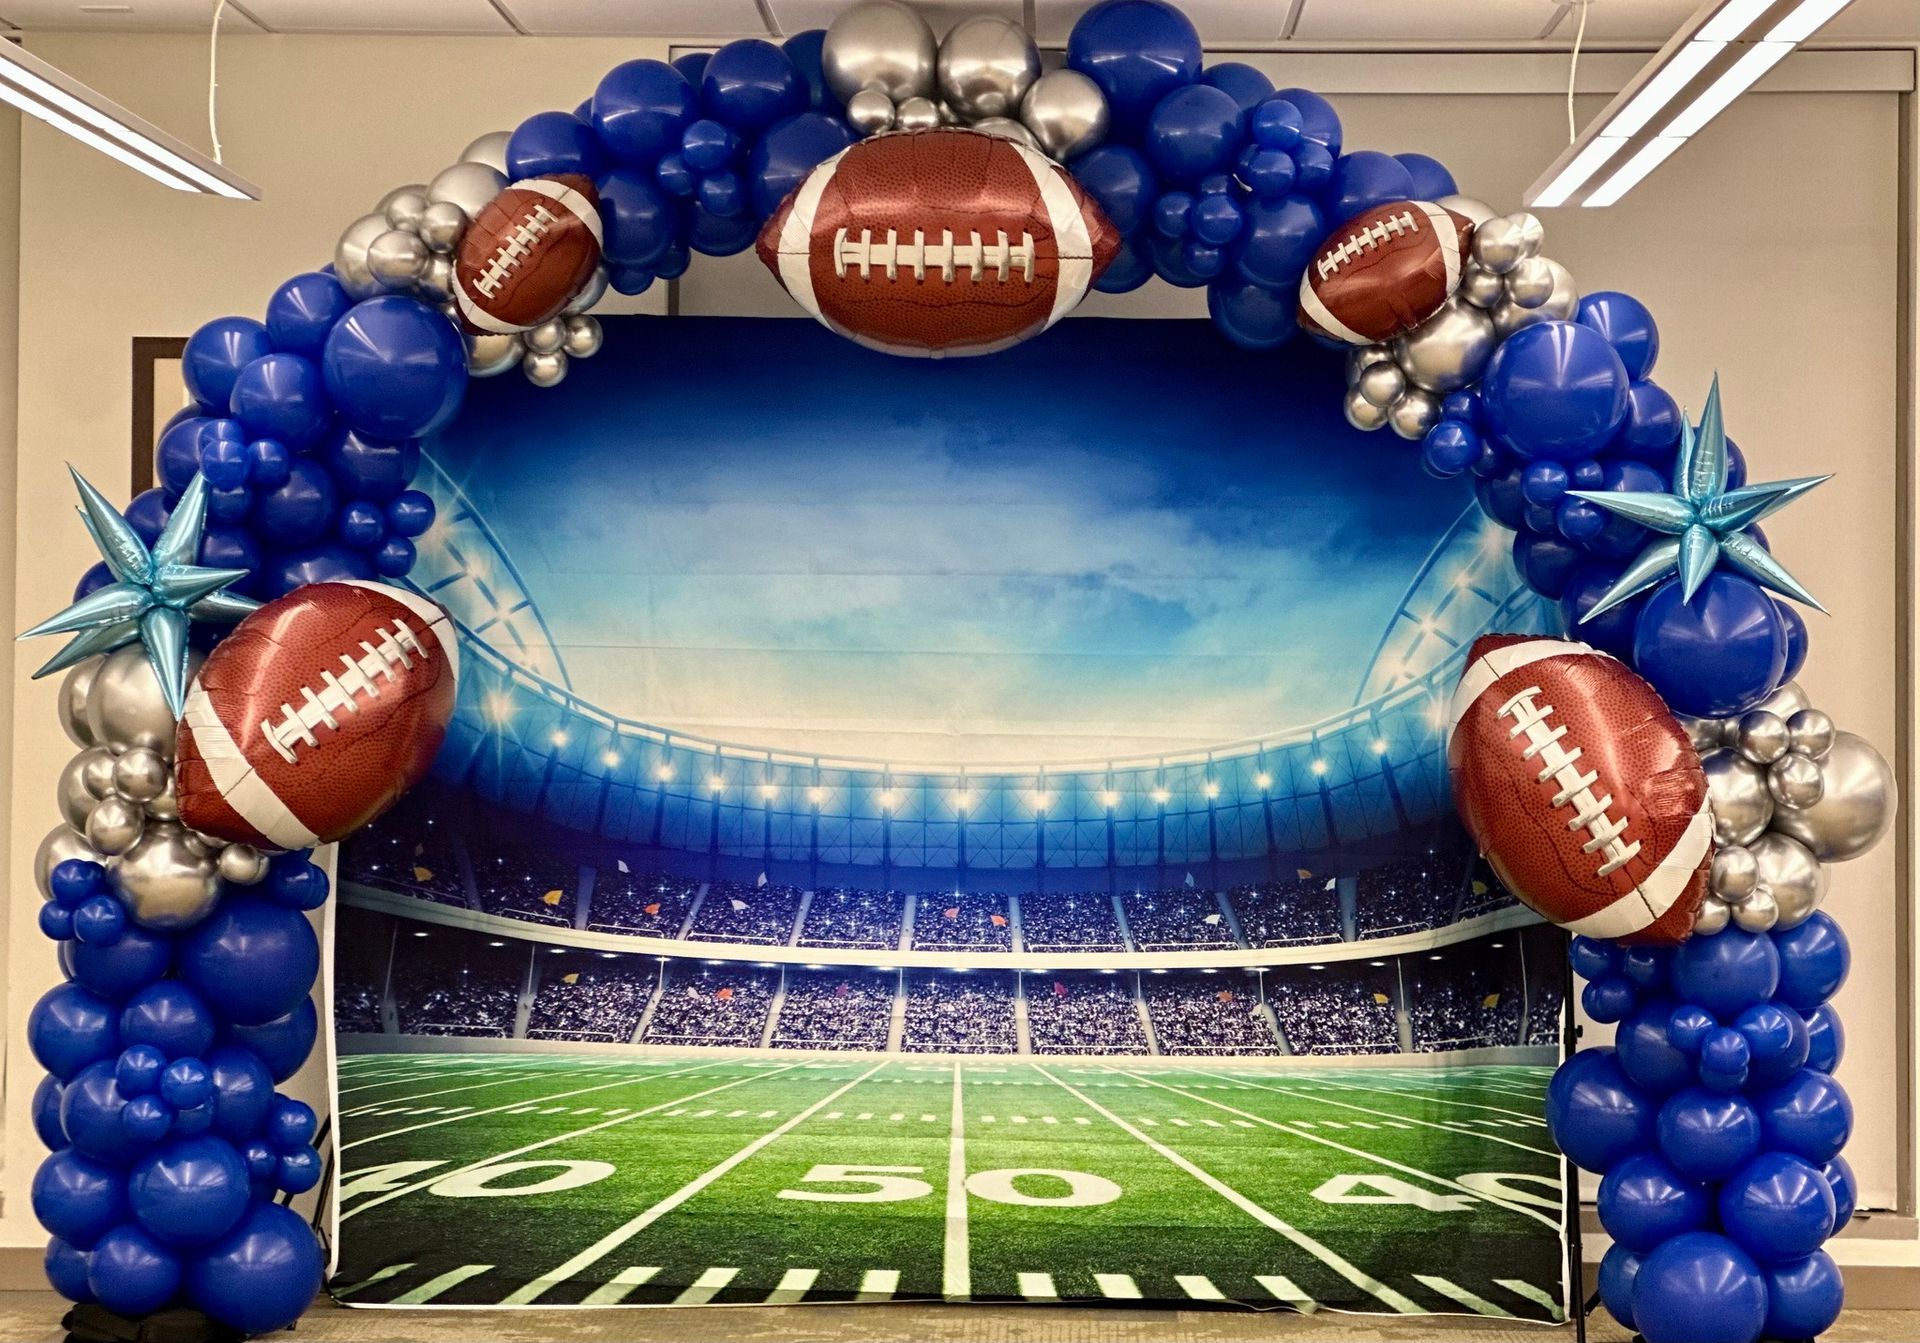 A balloon arch with a picture of a football field in the background.